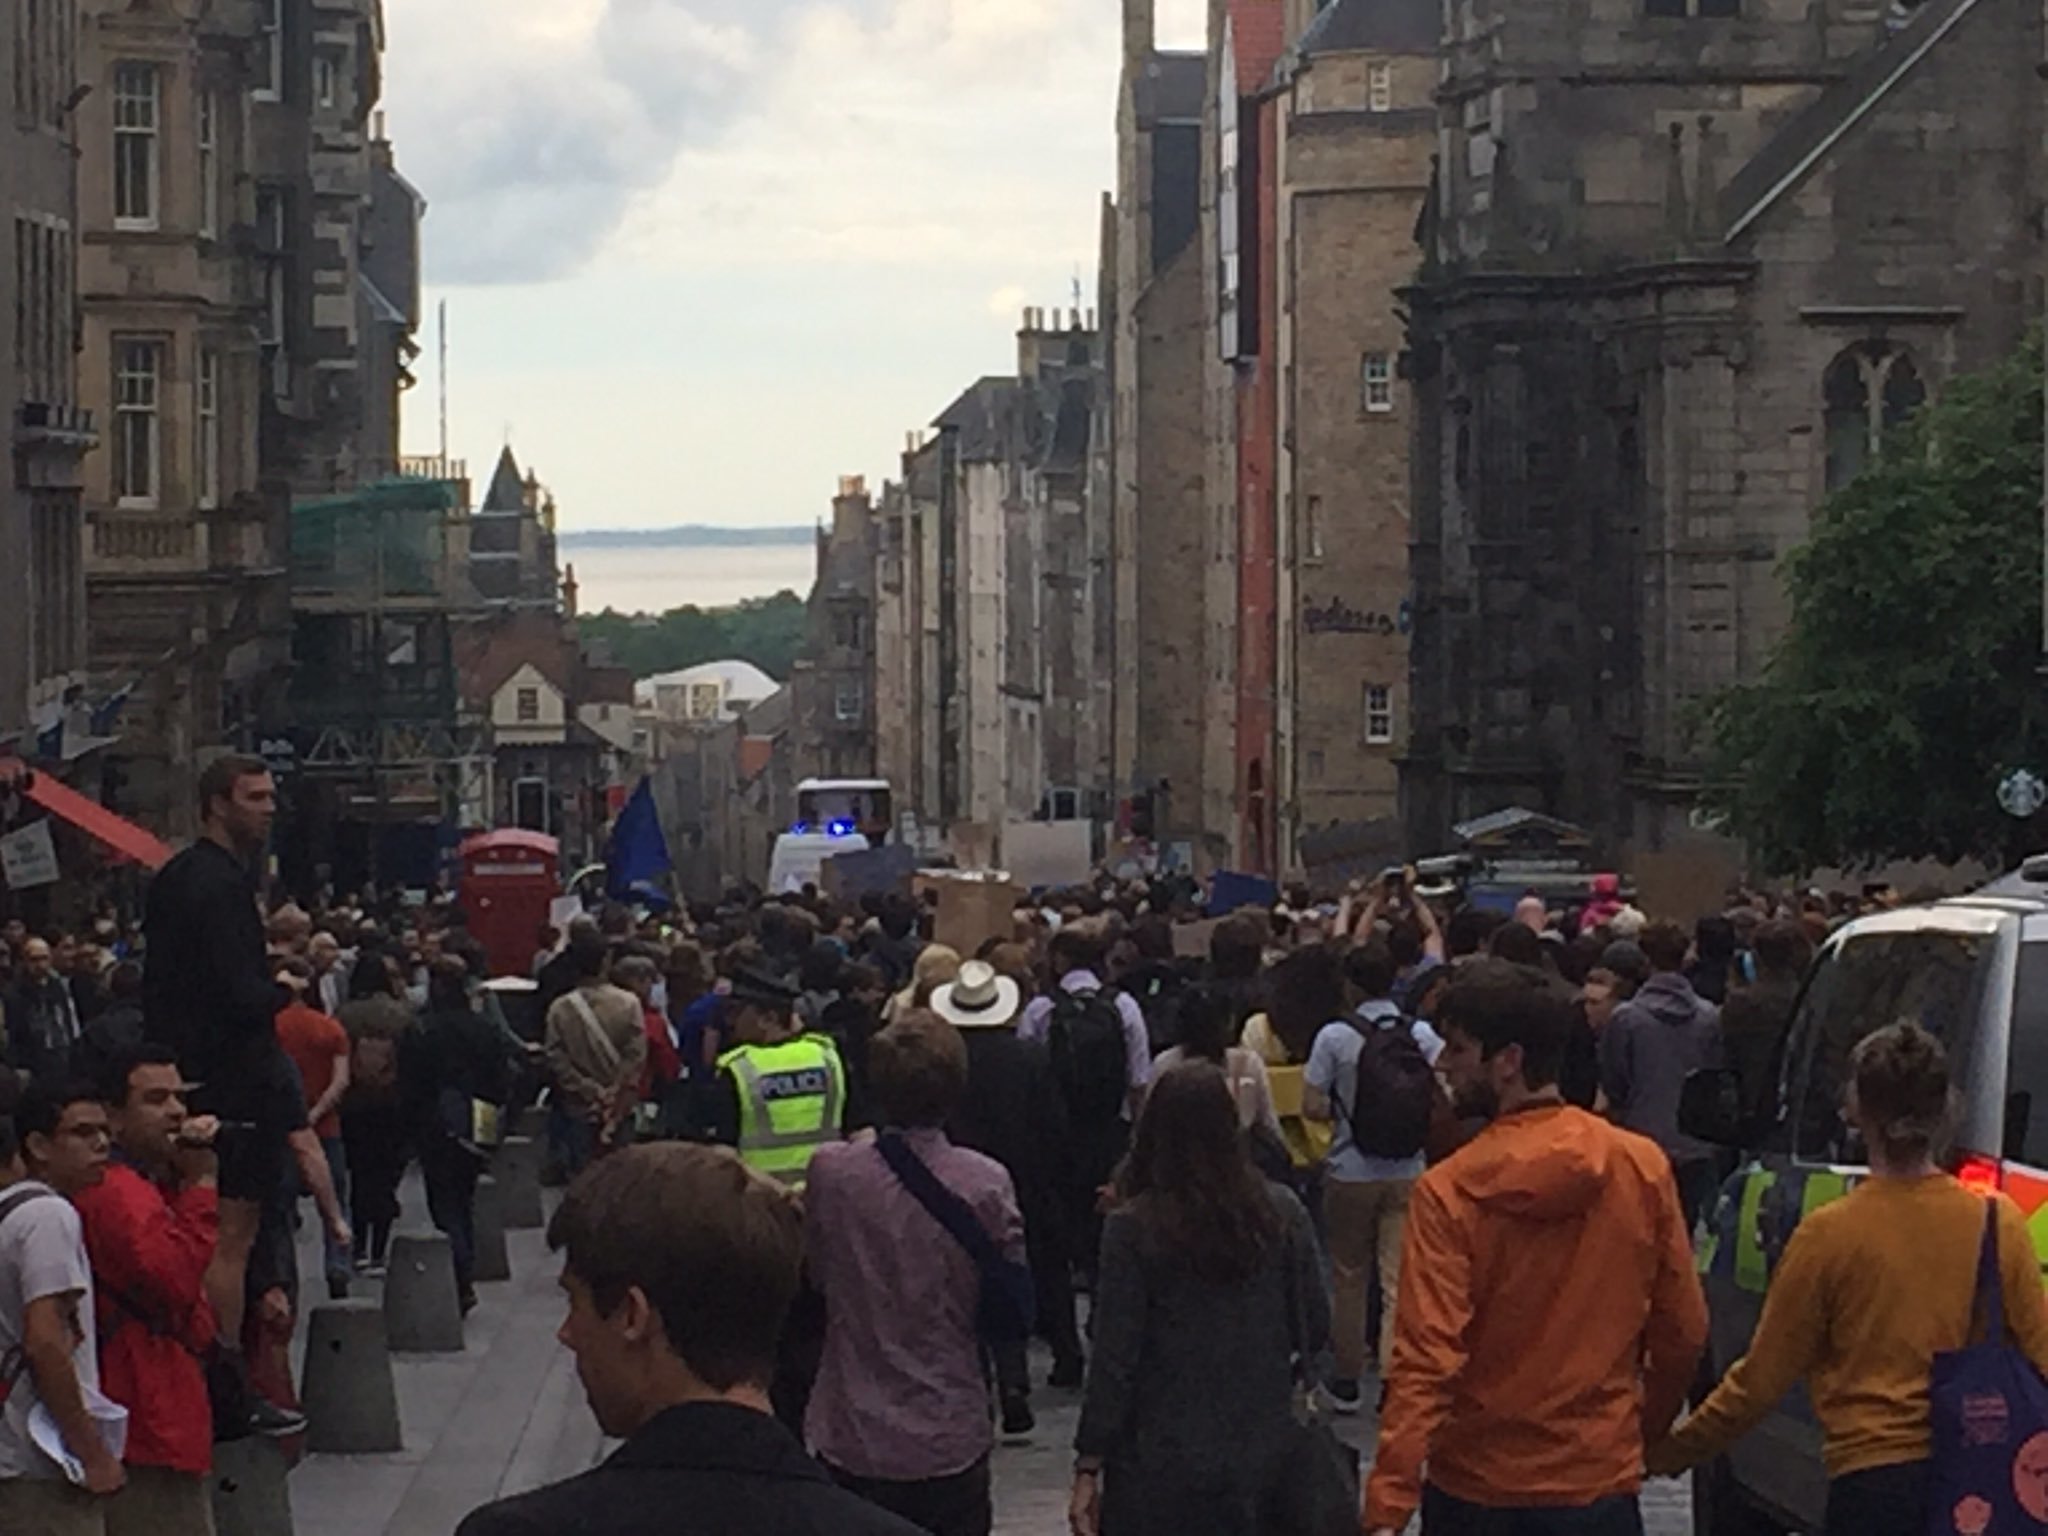 Protesters took to the streets in Edinburgh.